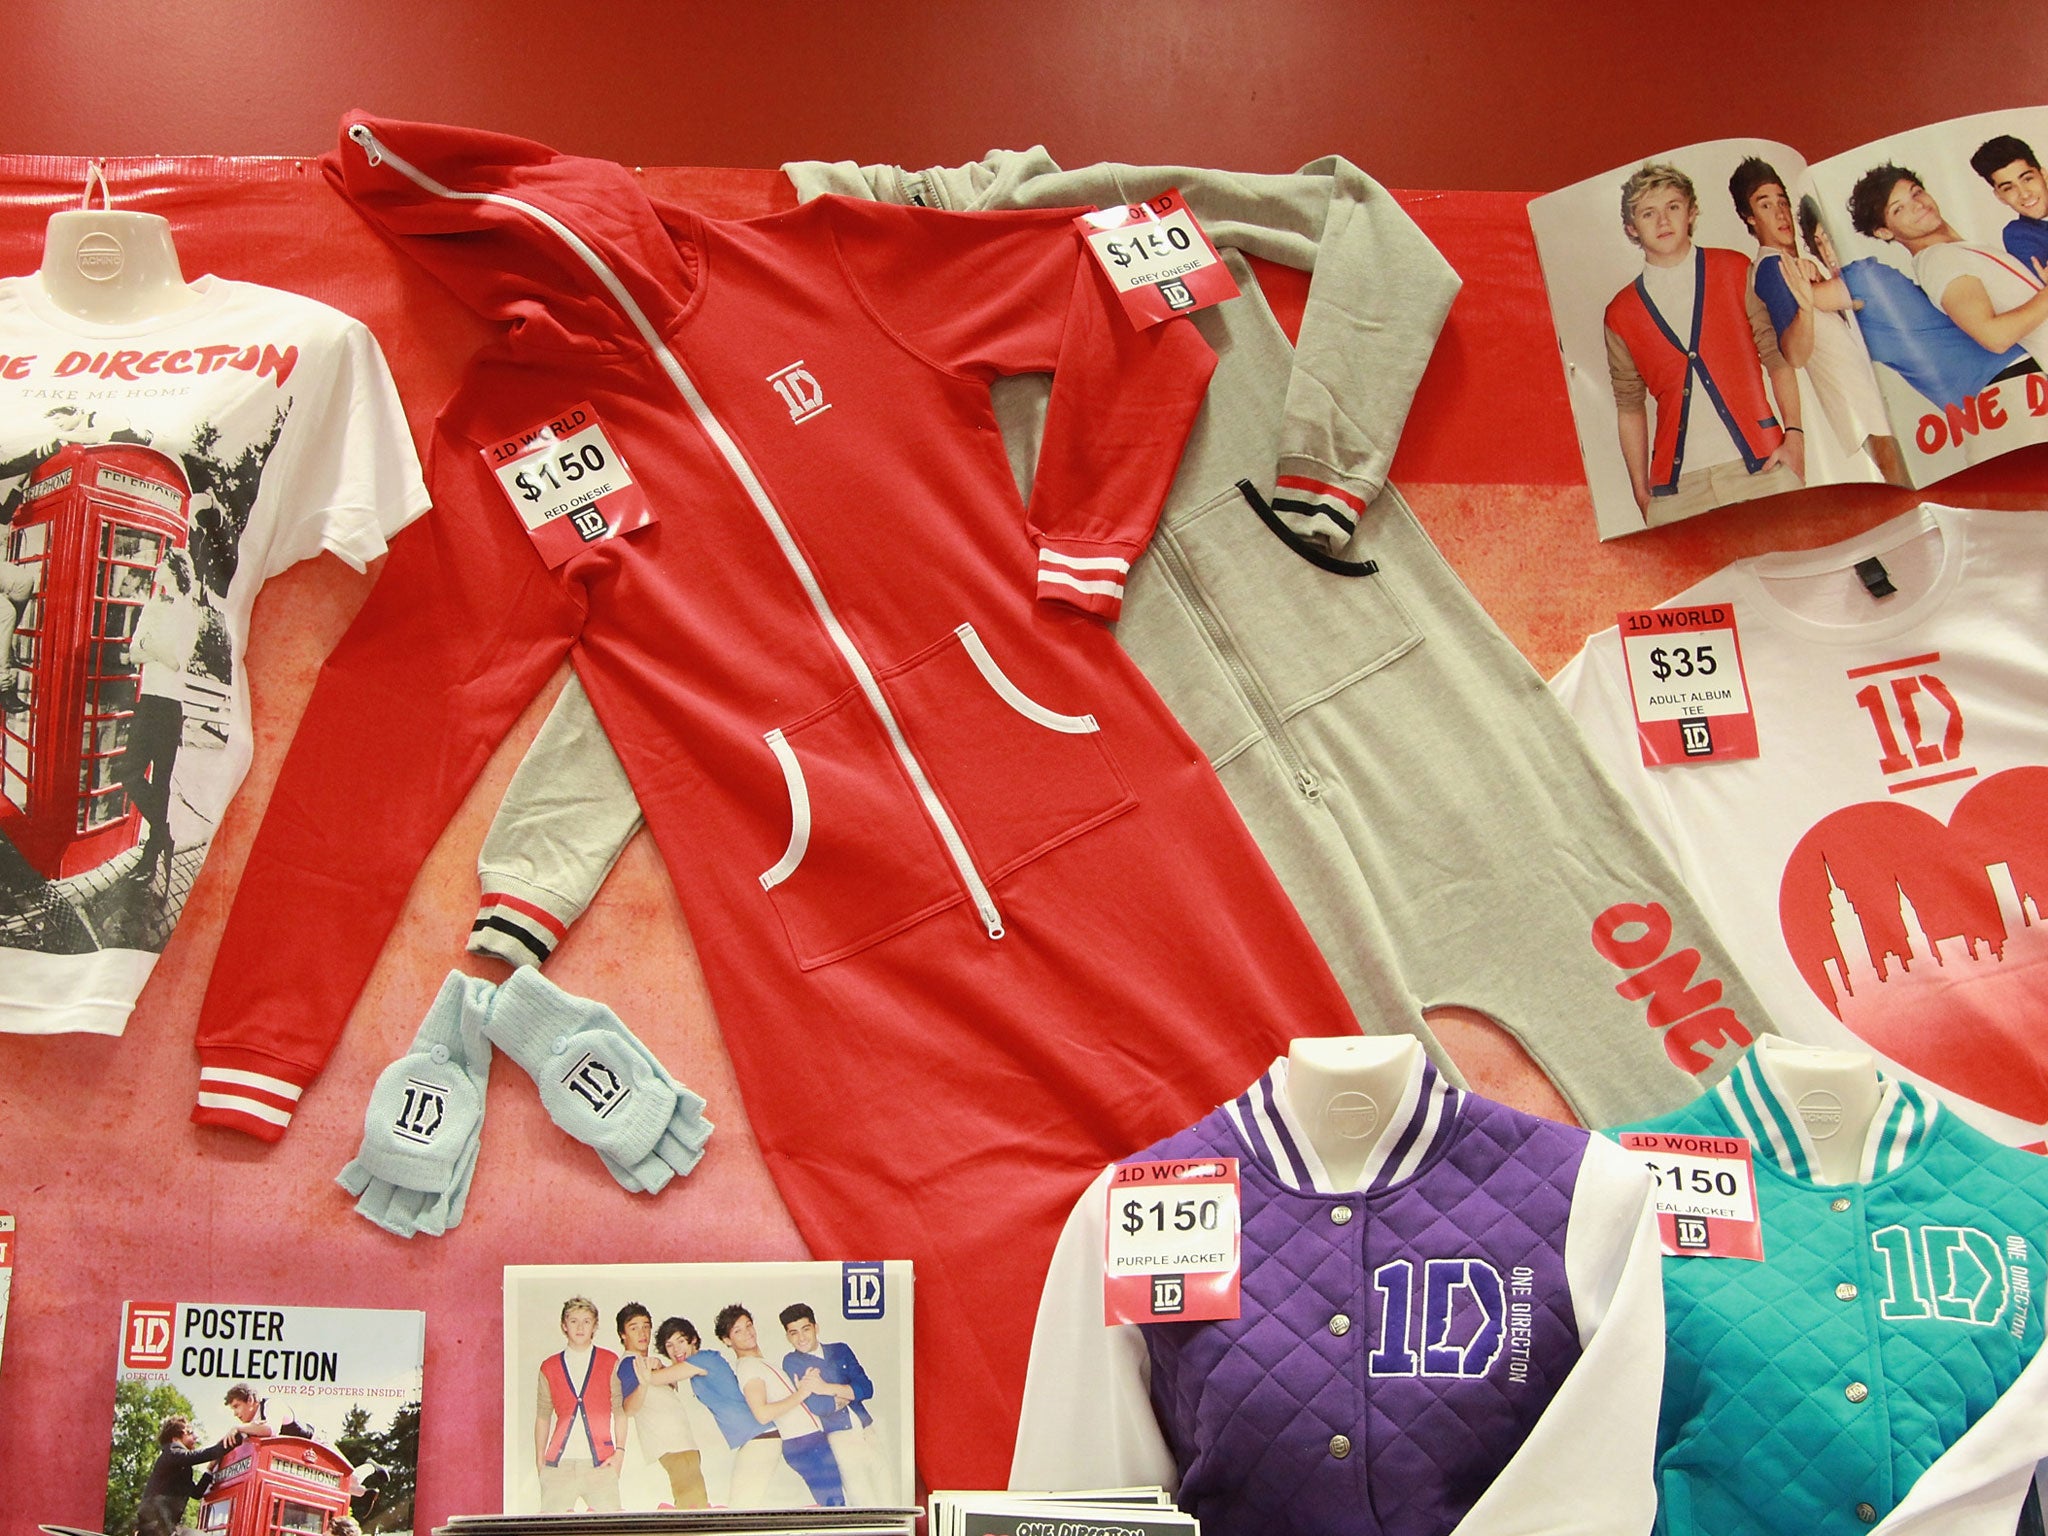 The 2012 must-have: A One Direction onesie.